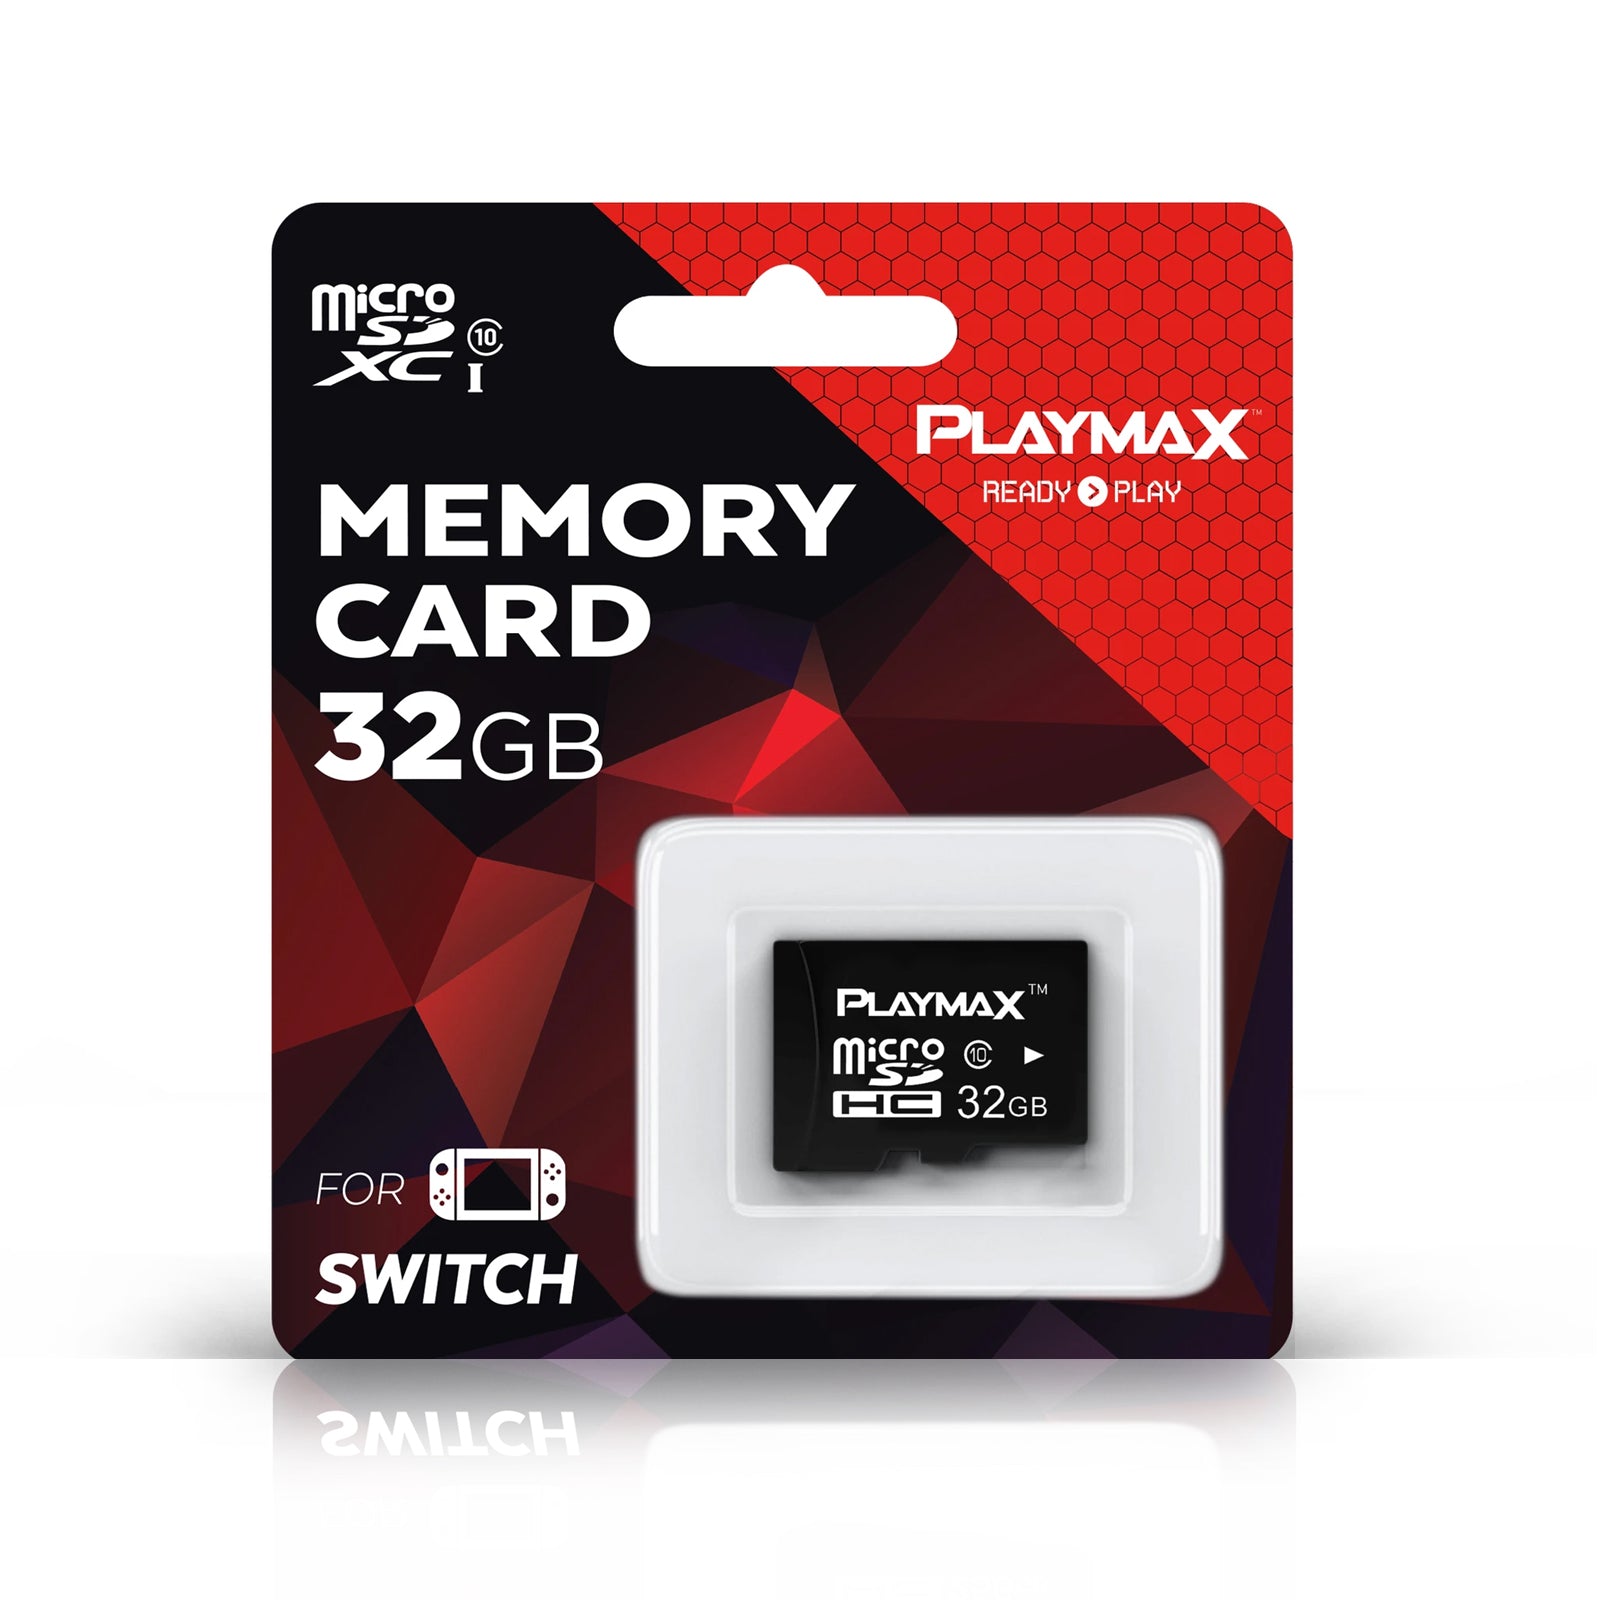 PLAYMAX MEMORY CARD 32GB FOR SWITCH